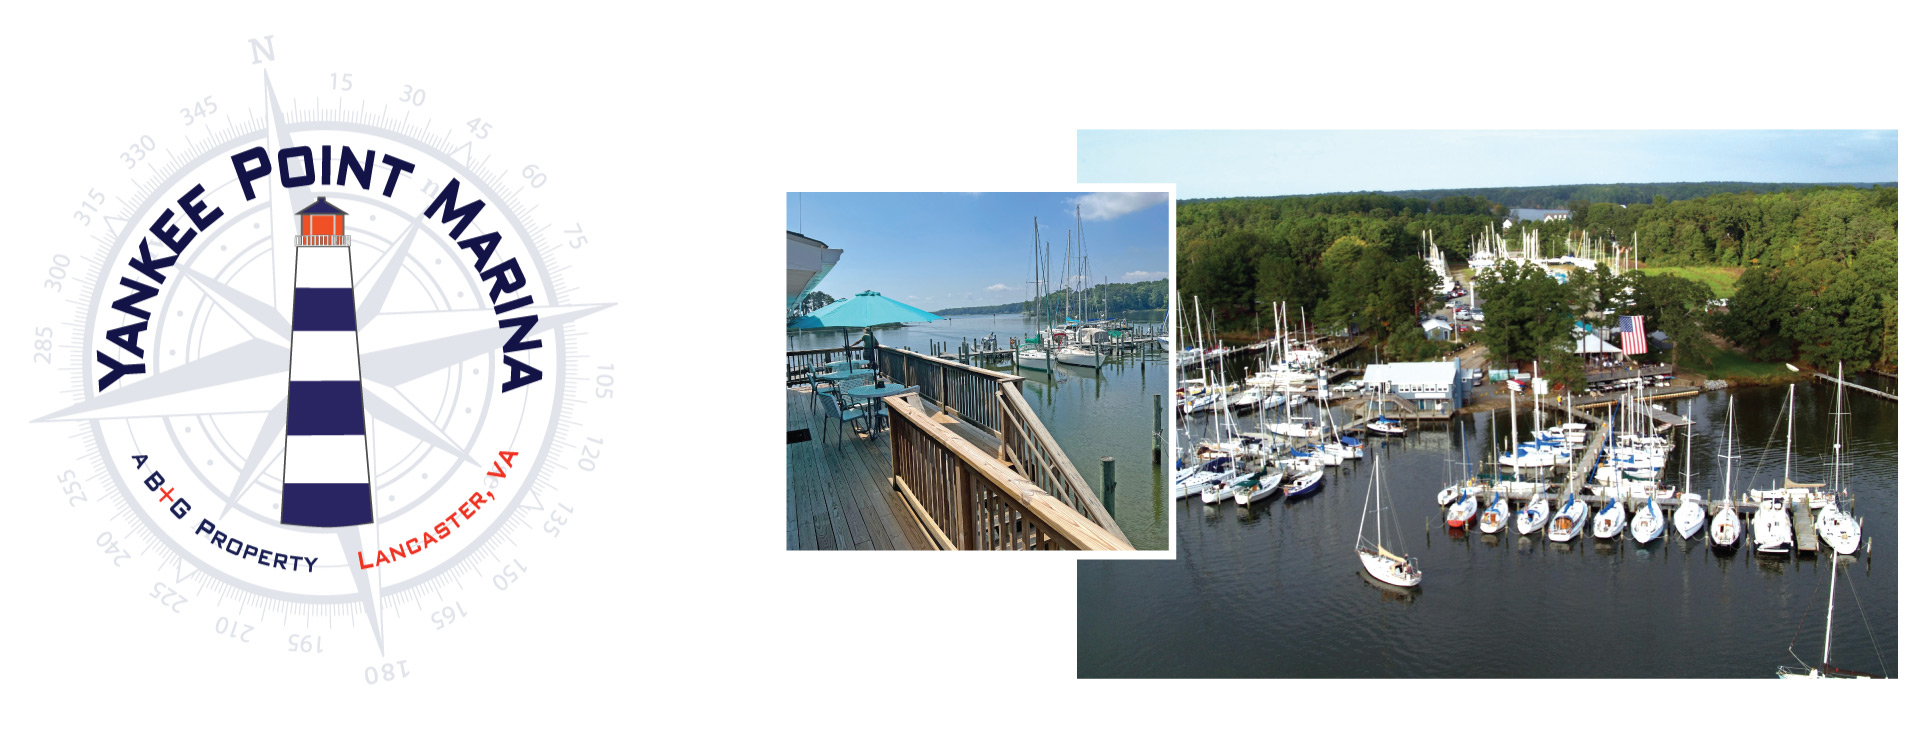 Yankee Point Marina Logo and Overhead View of Boats in the Water